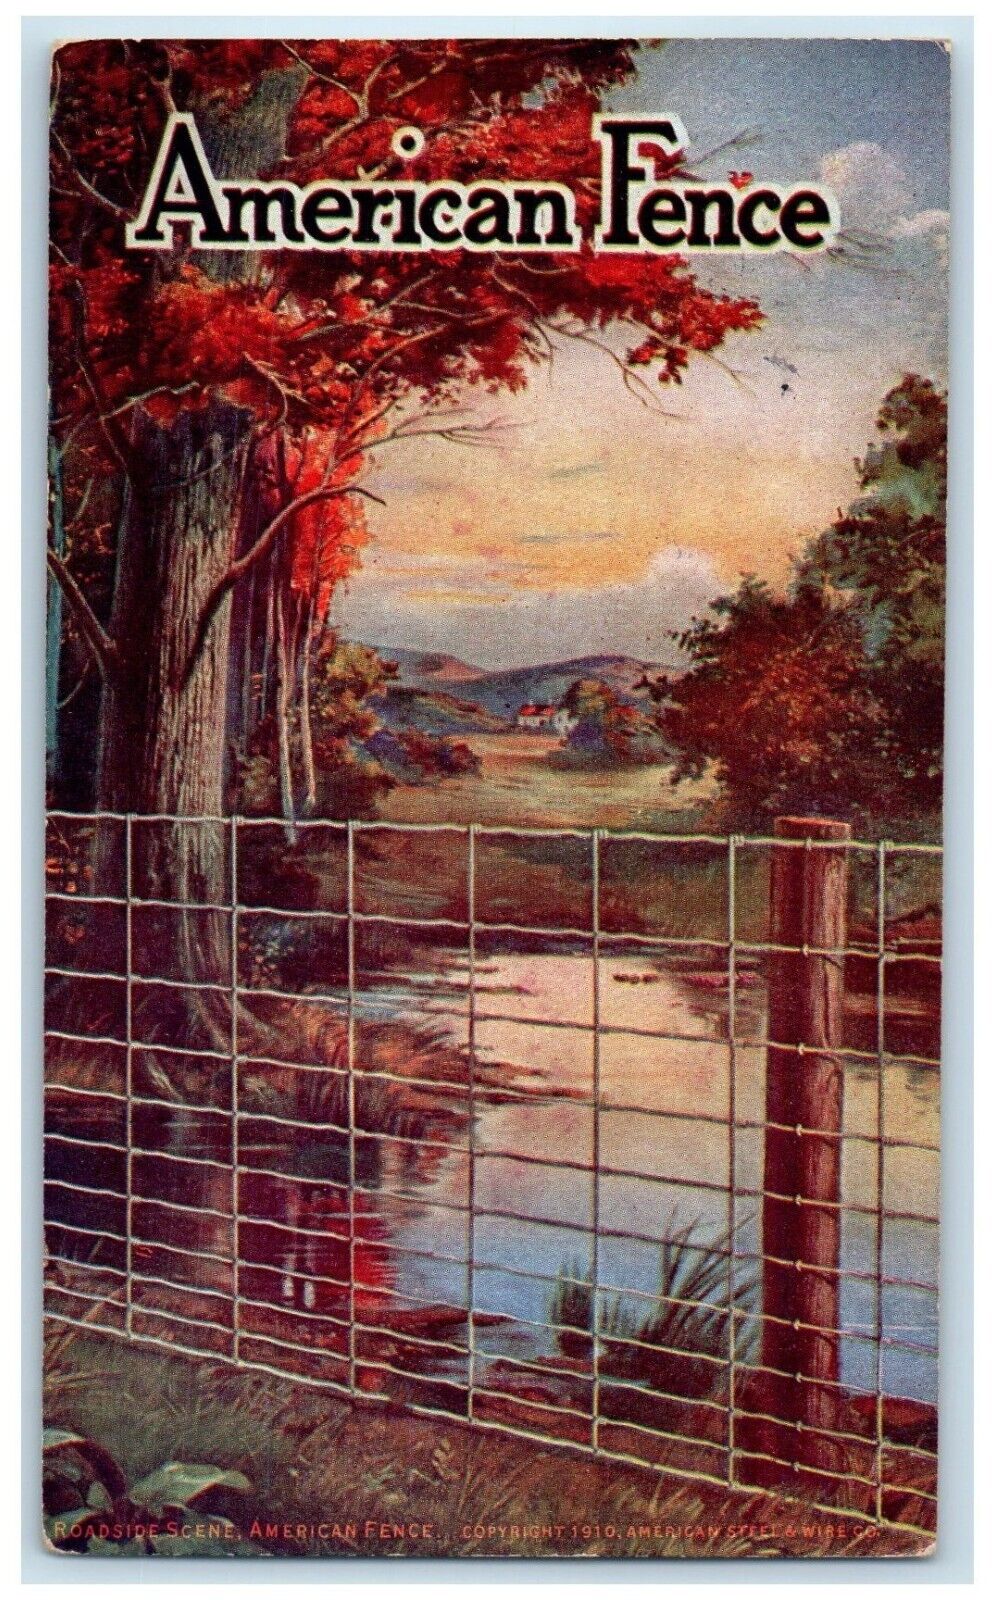 1911 American Fence Advertising Palmyra Indiana IN Posted Antique Postcard